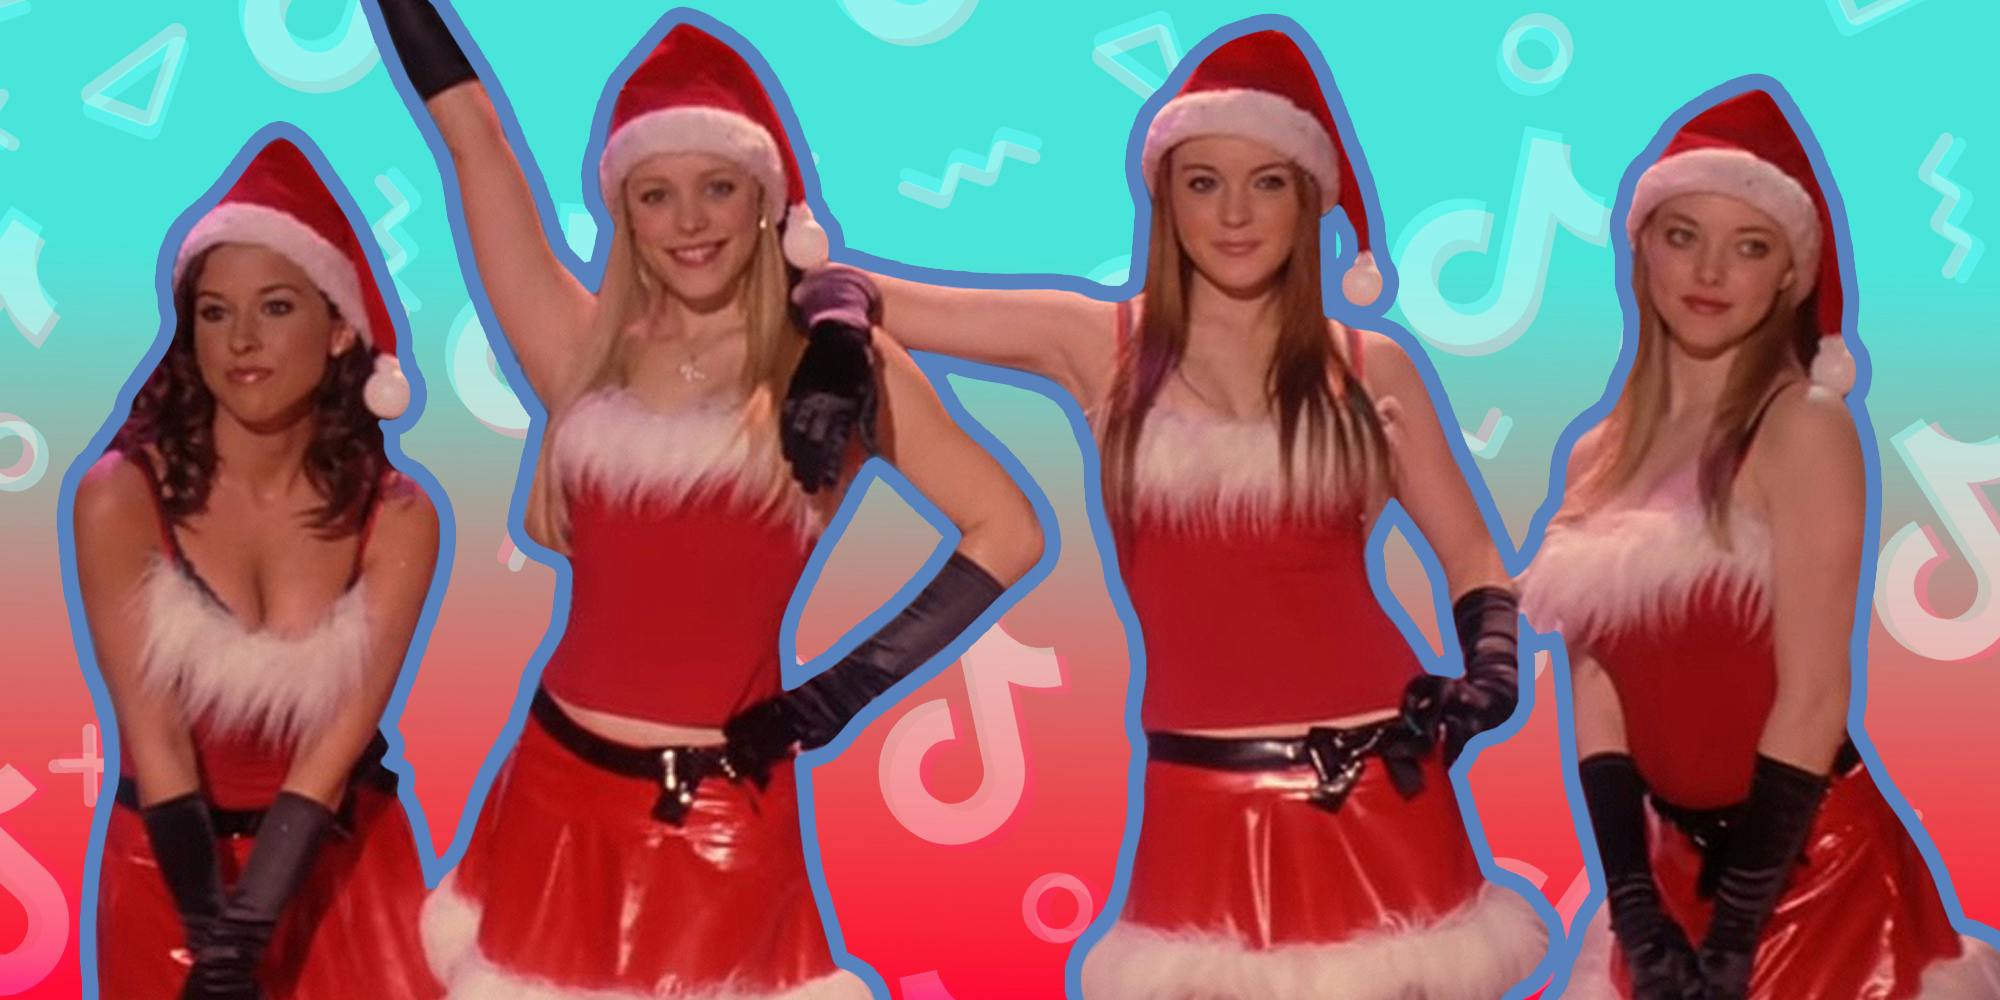 Now You Can Watch ‘Mean Girls’ on TikTok. Here’s Why Creators Should Care.